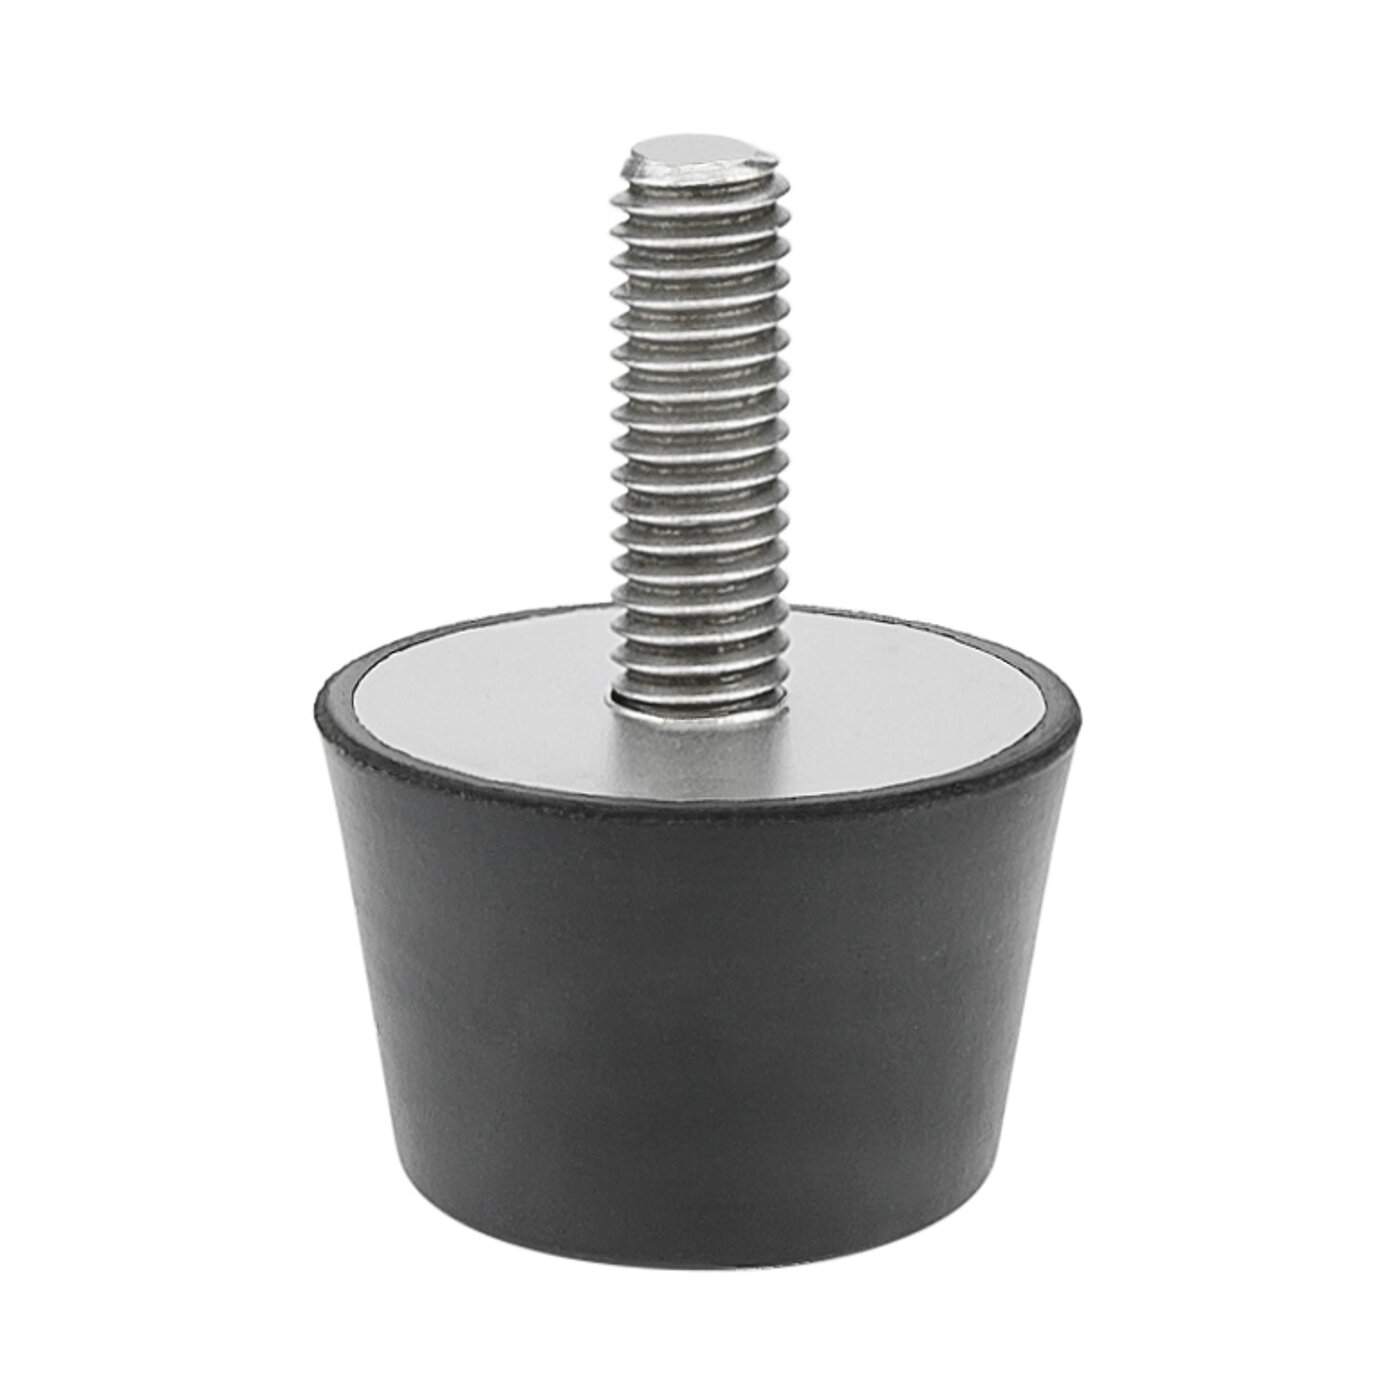 a rubber-metal bearing with outer thread on one side and a black, conical elastomer corpus, isolated on white background